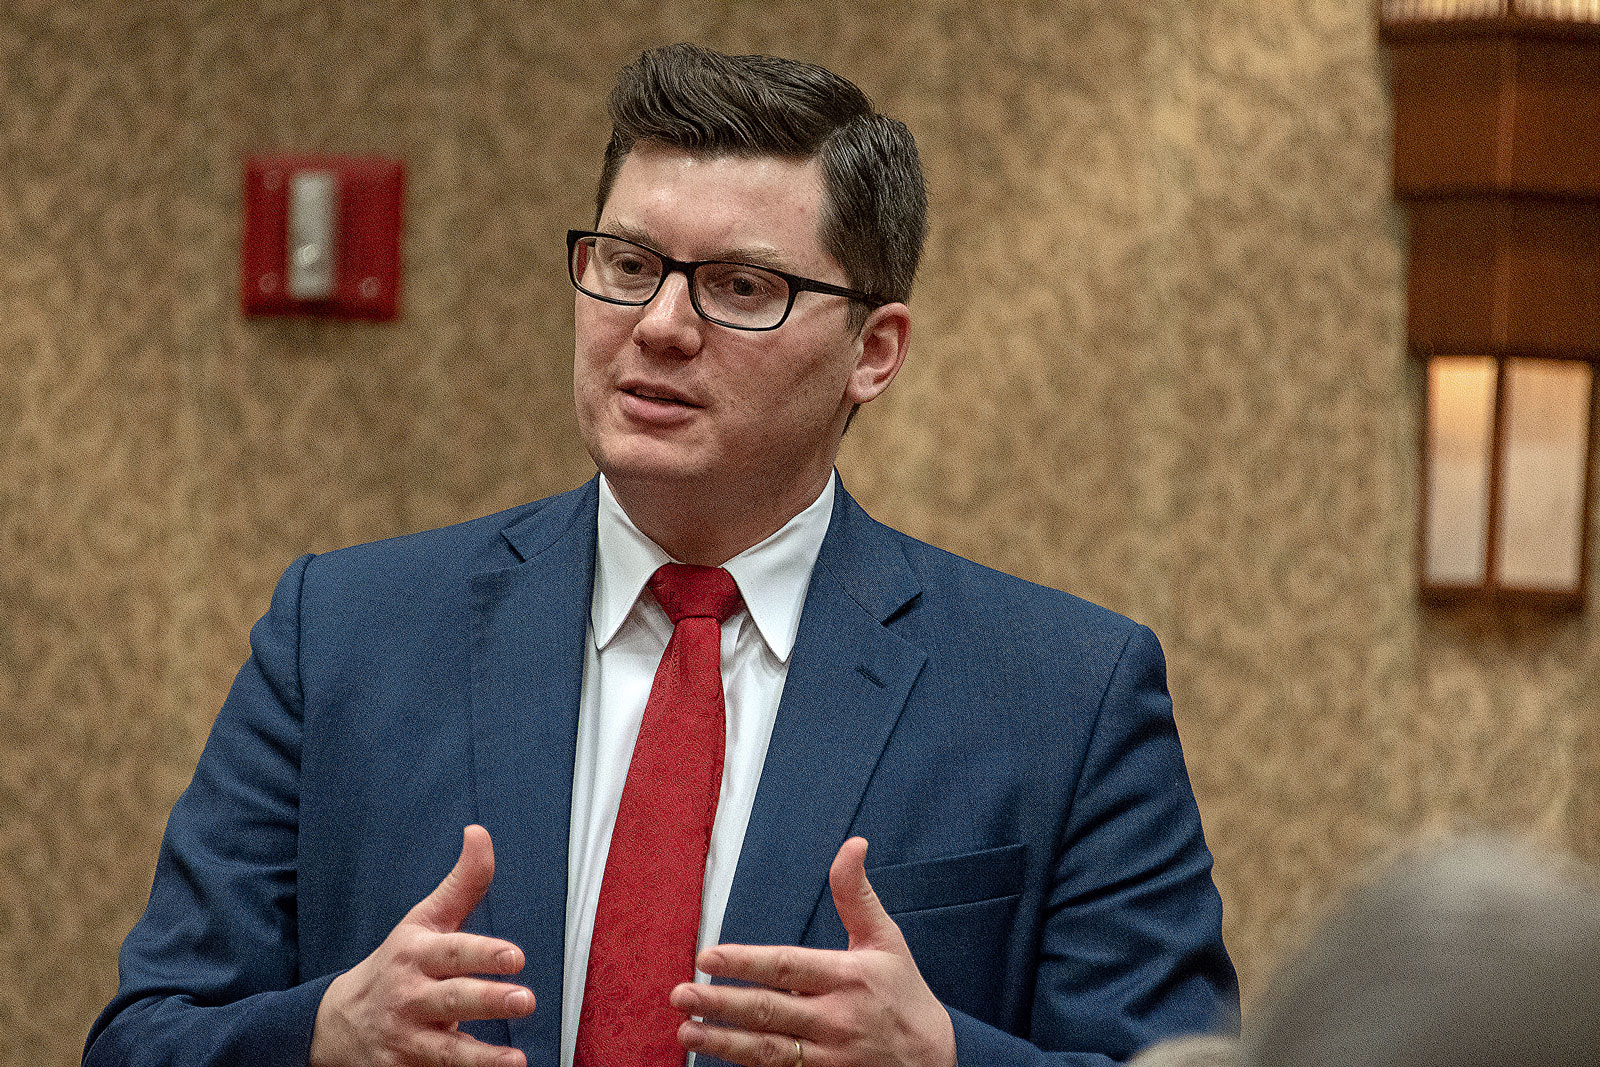 Jake LaTurner talks with members of the 2nd congressional district during a meeting at the annual GOP convention in Topeka, Kansas on February 16, 2019.